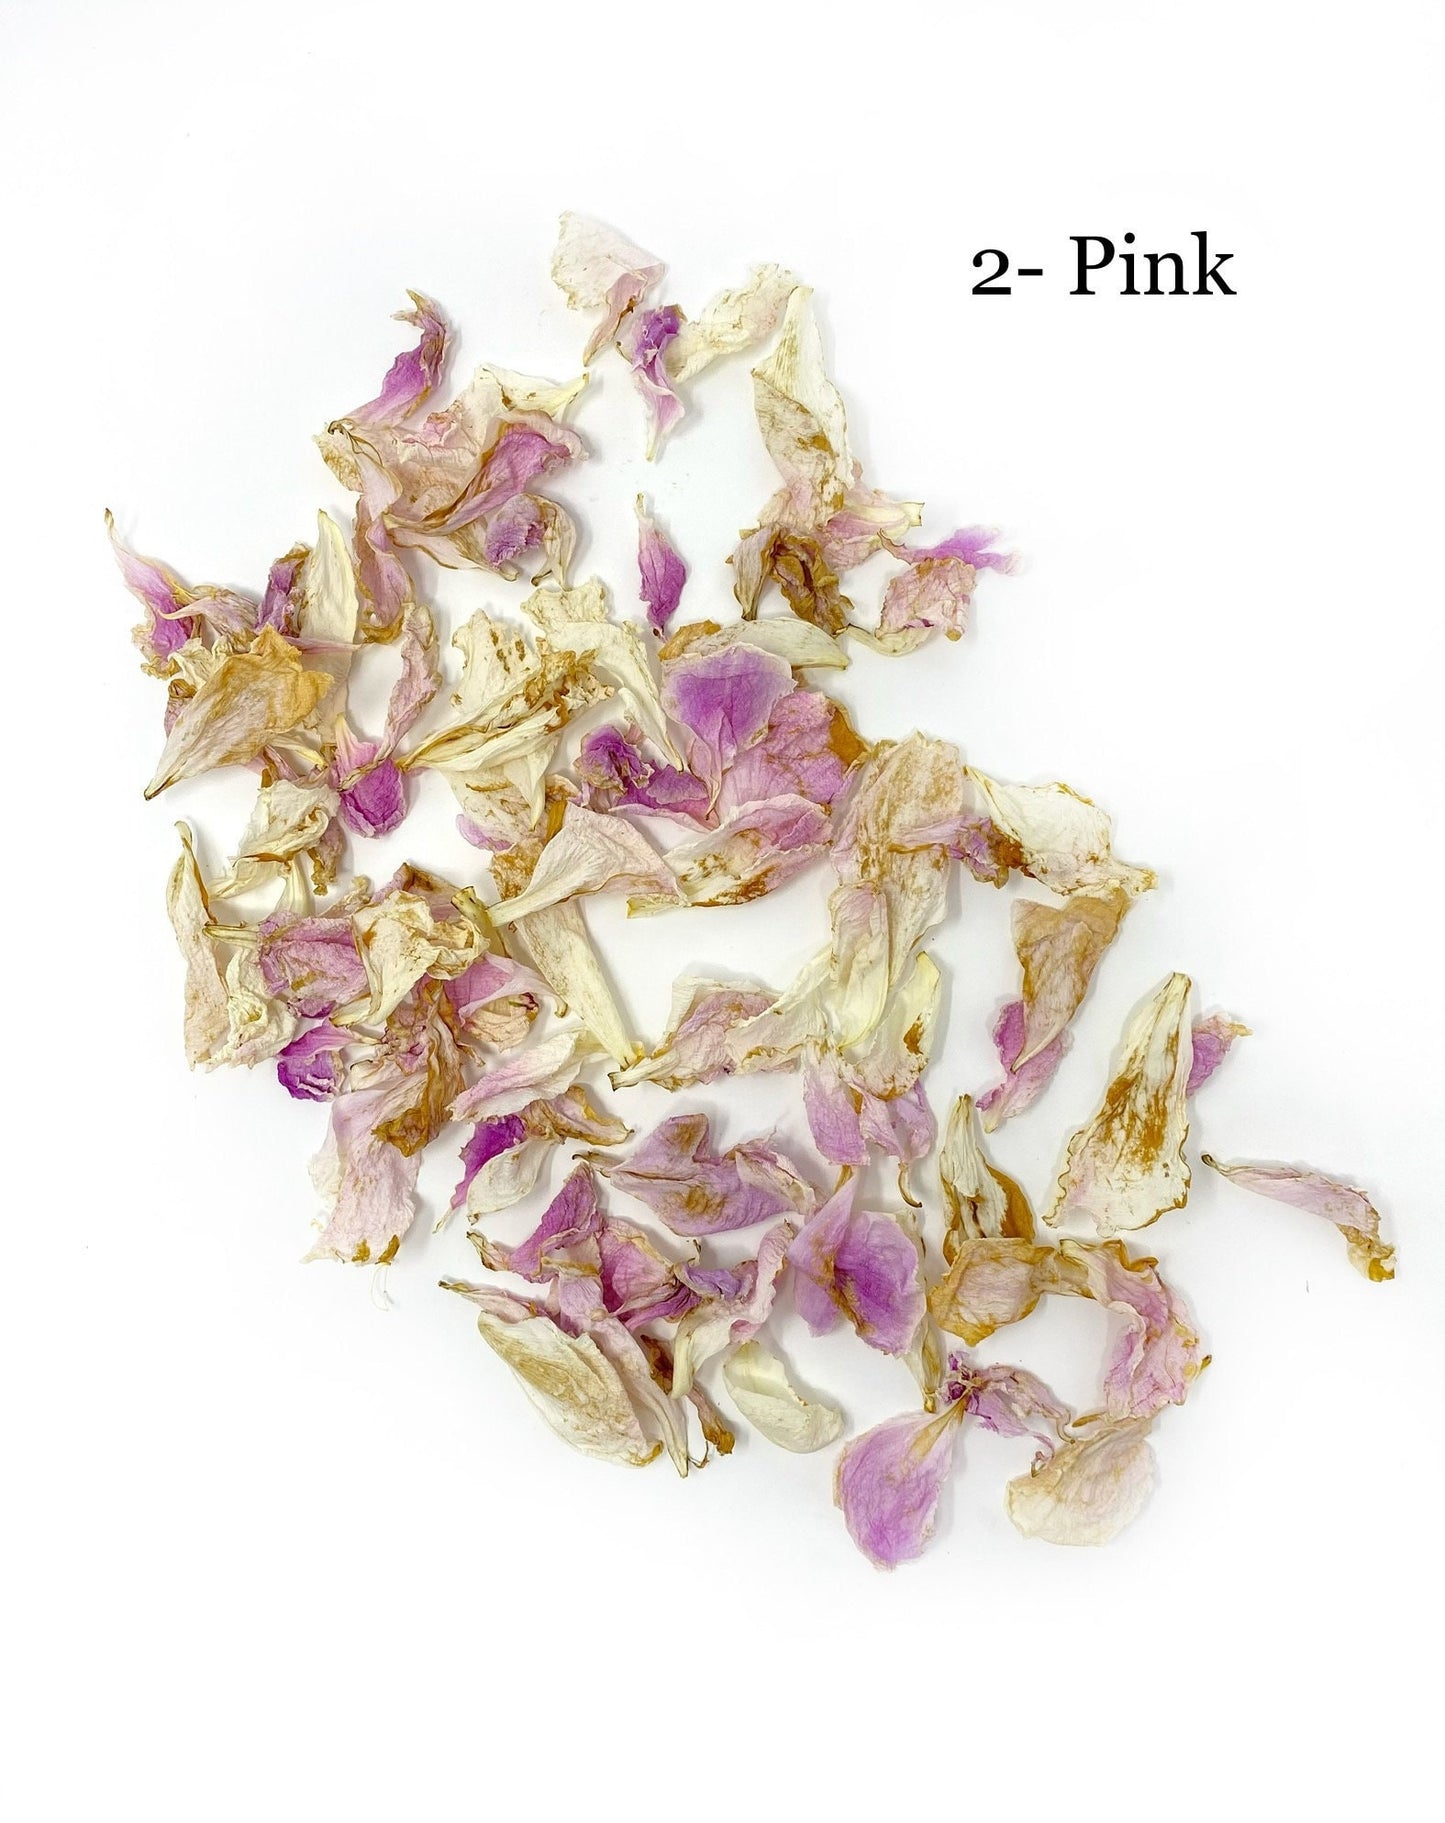 Peony Petals, Potpourri, Dried Petals, Decor, Wedding, Decoration, Filler, Burgundy, White, Dried Flowers, Pink, Brown, Arts and Craft